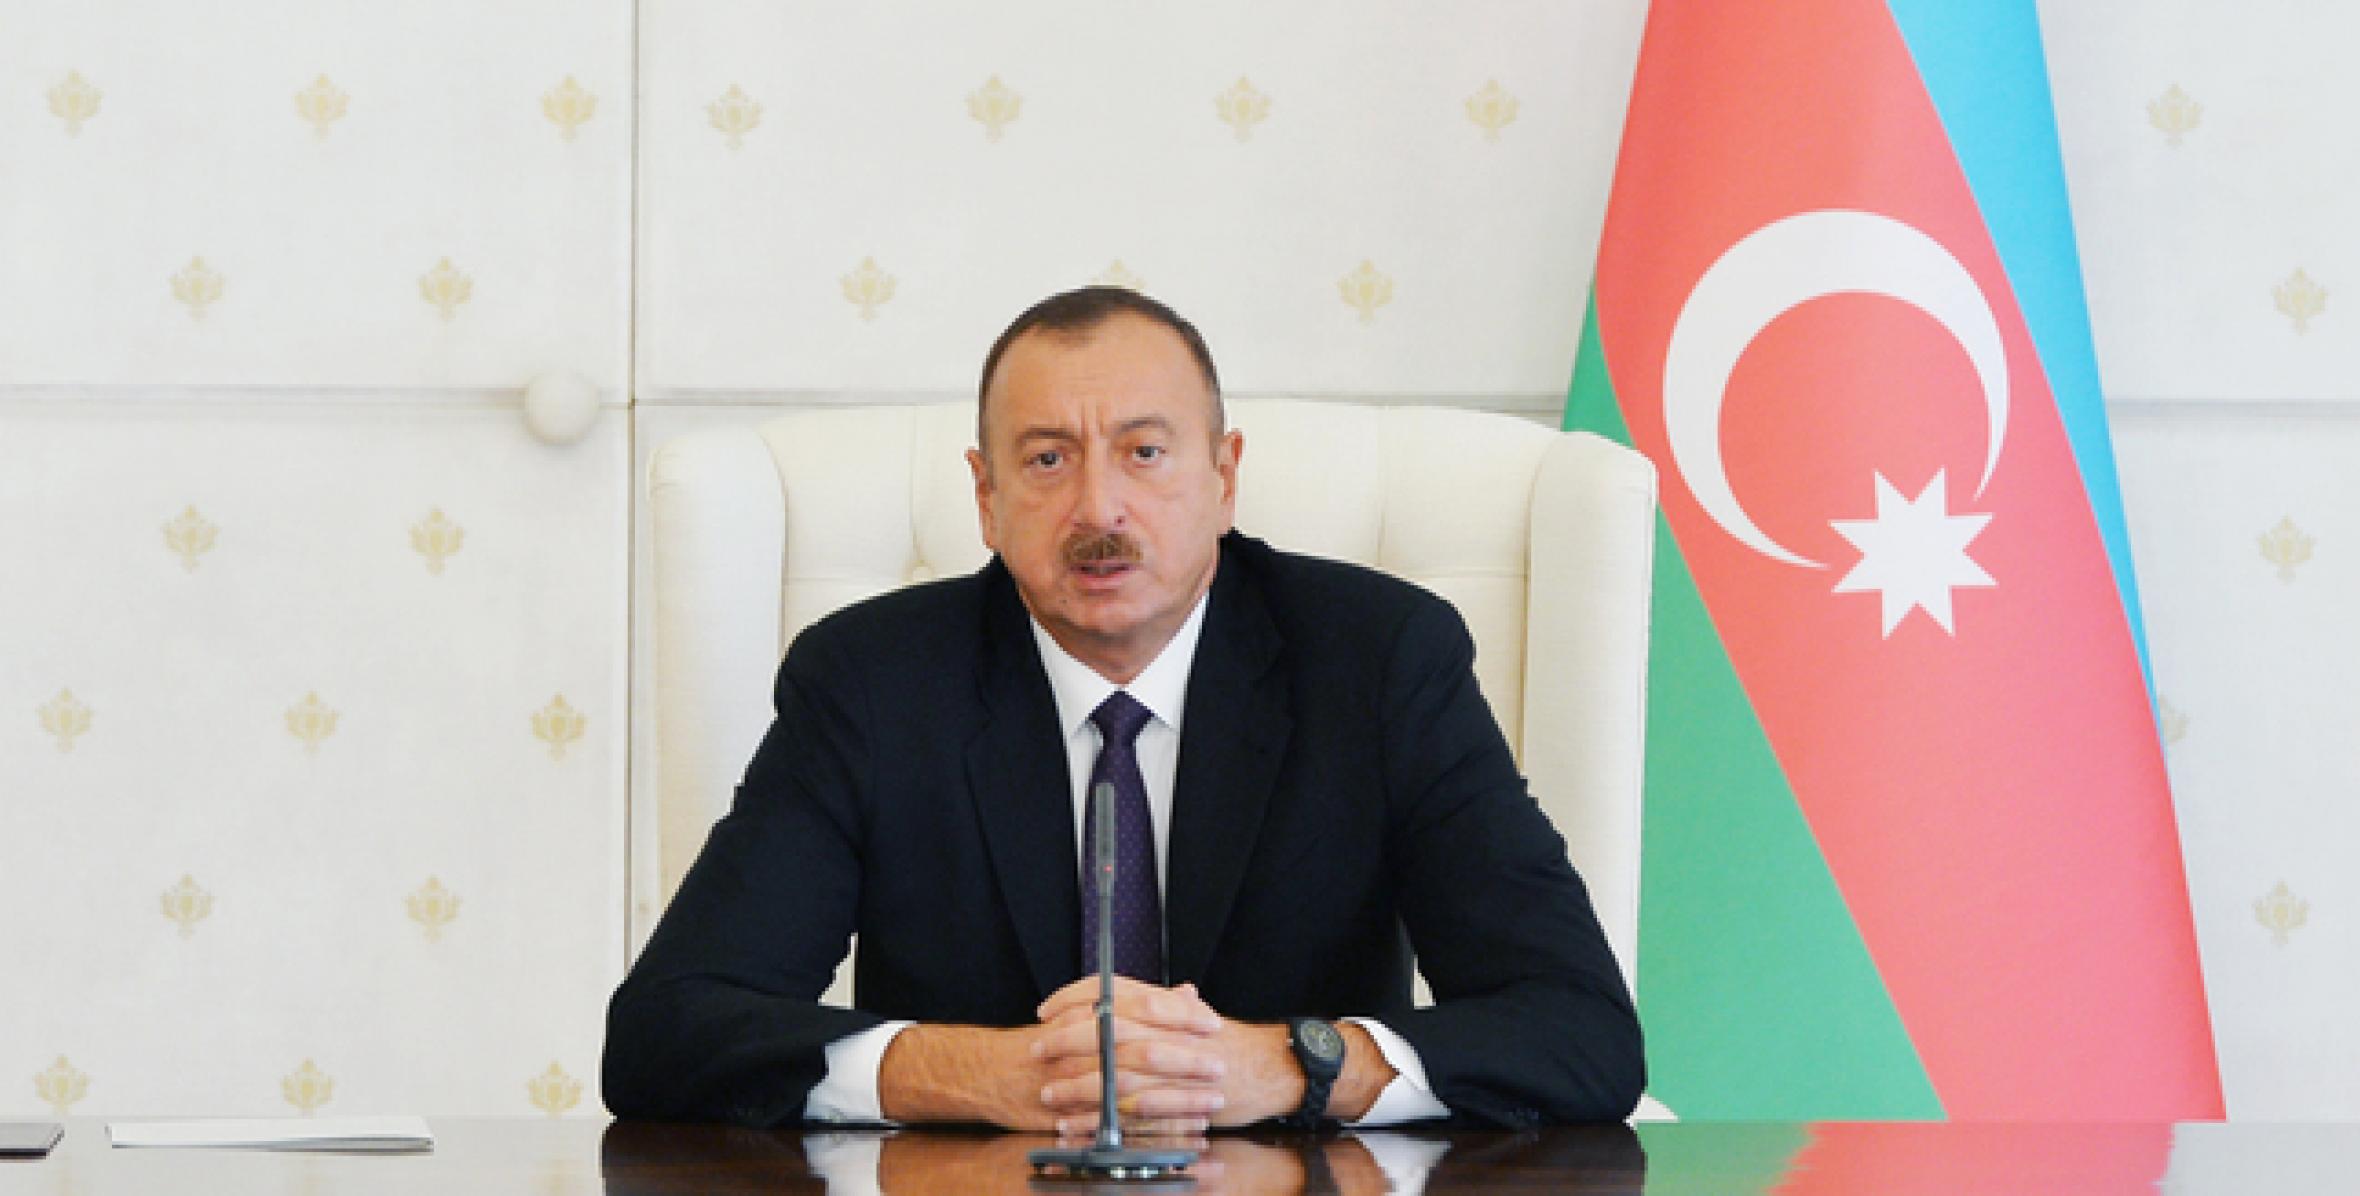 Opening speech by Ilham Aliyev at the first meeting of the Organizing Committee of the 4th Islamic Solidarity Games